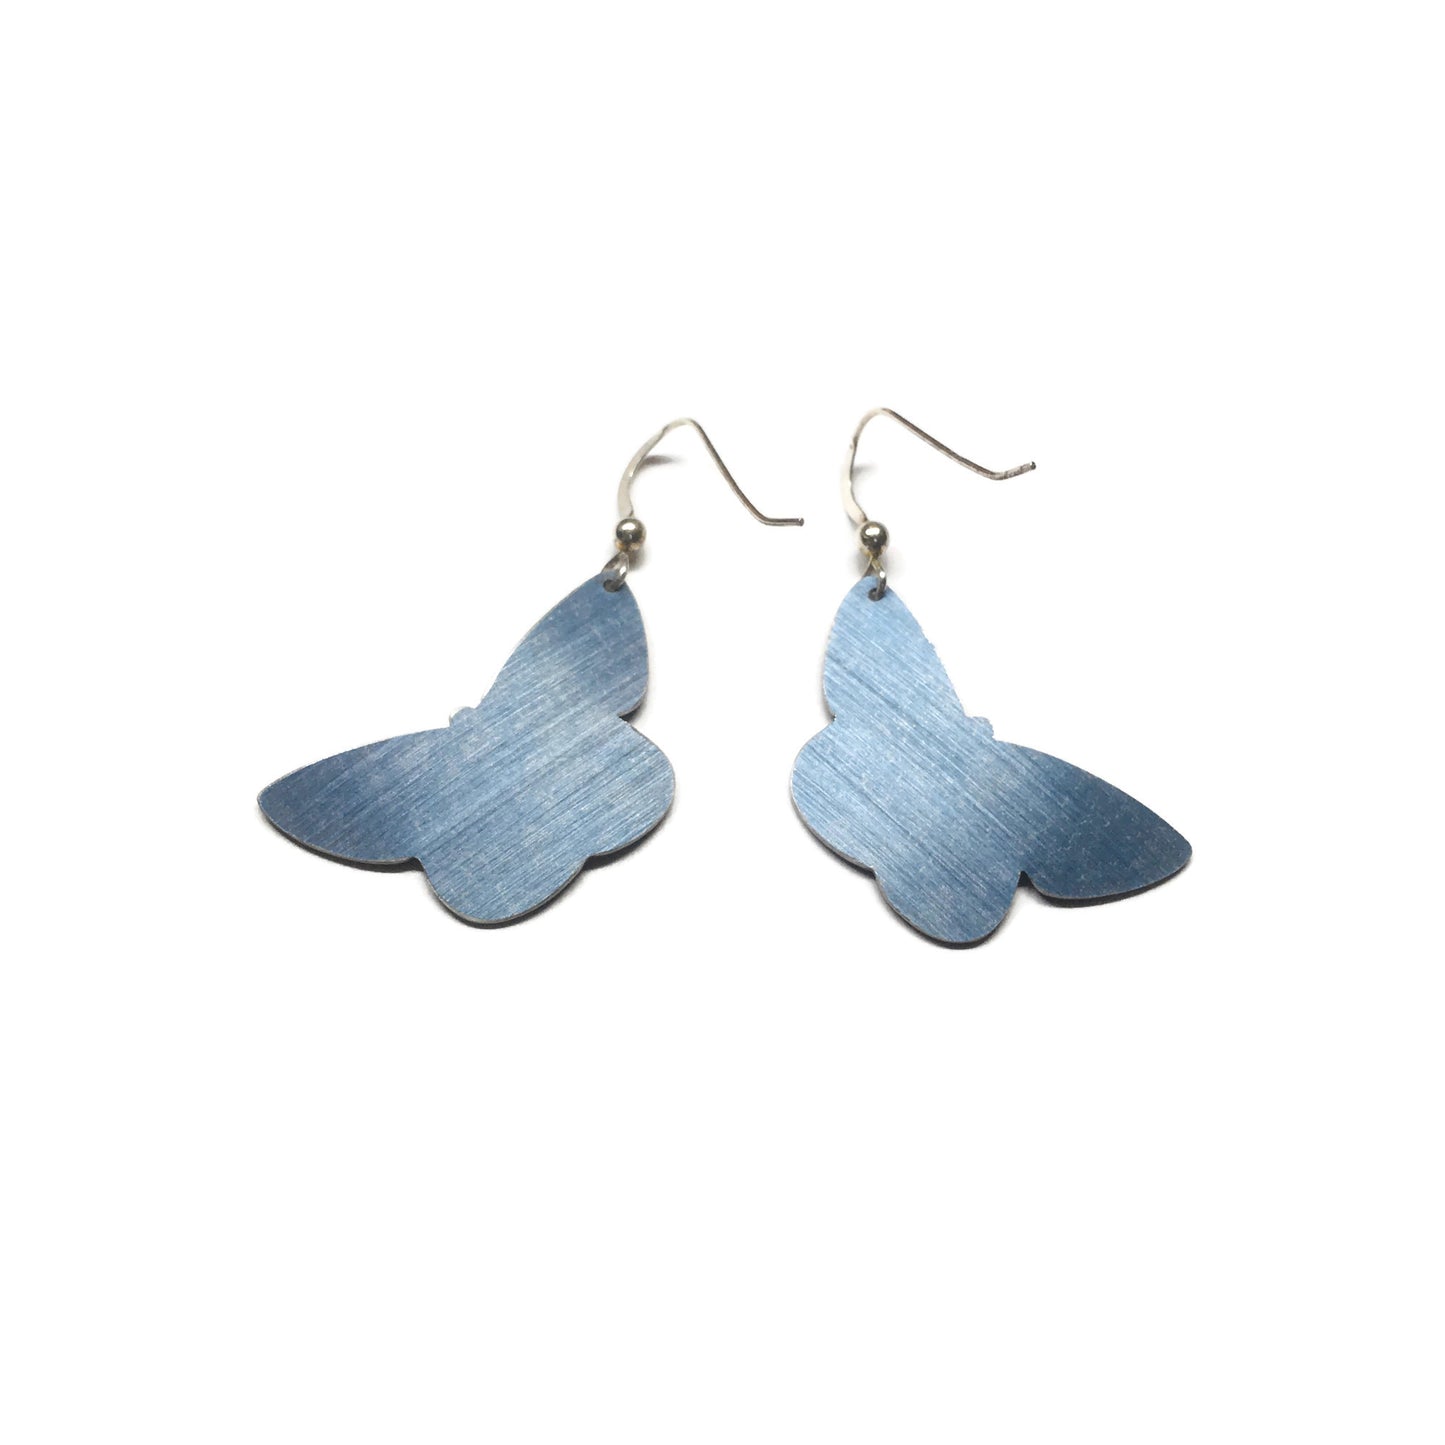 Back of Common Blue butterfly earrings by Photofinish Jewellery